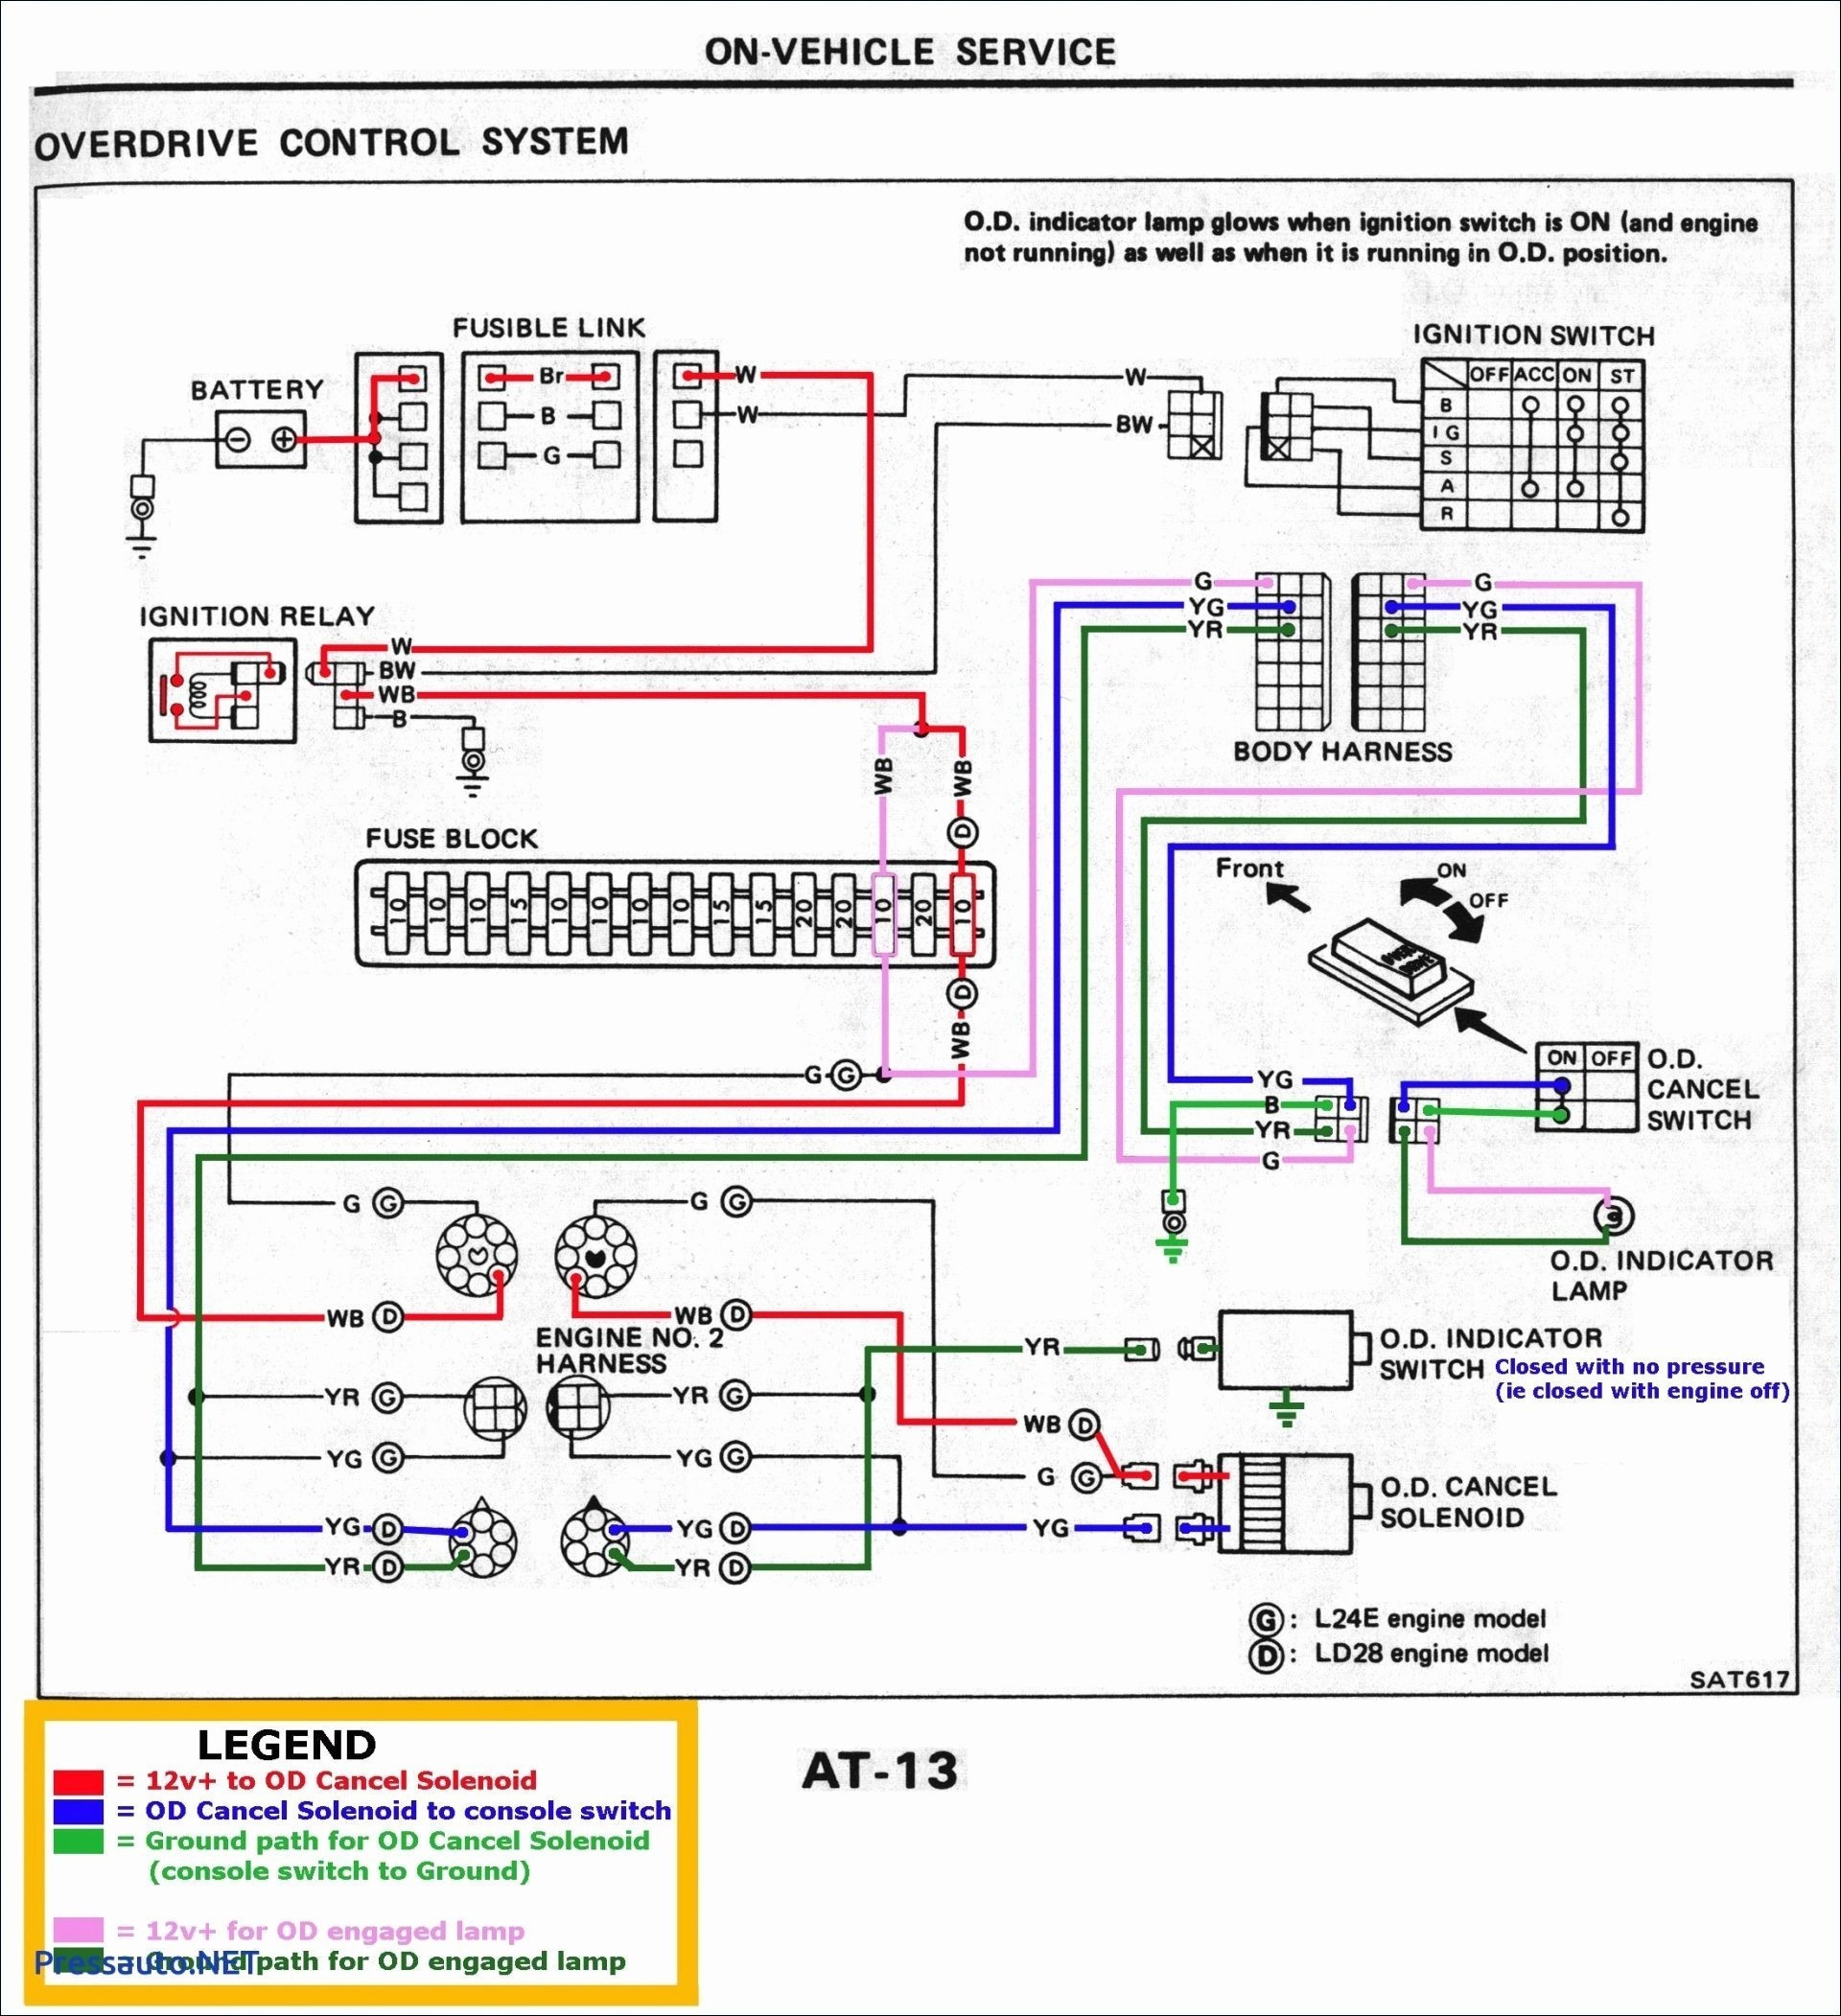 Wiring Diagram Power to Light to Switch New Wiring Diagram 3 Gang Light Switch New Wiring Diagram for Light with